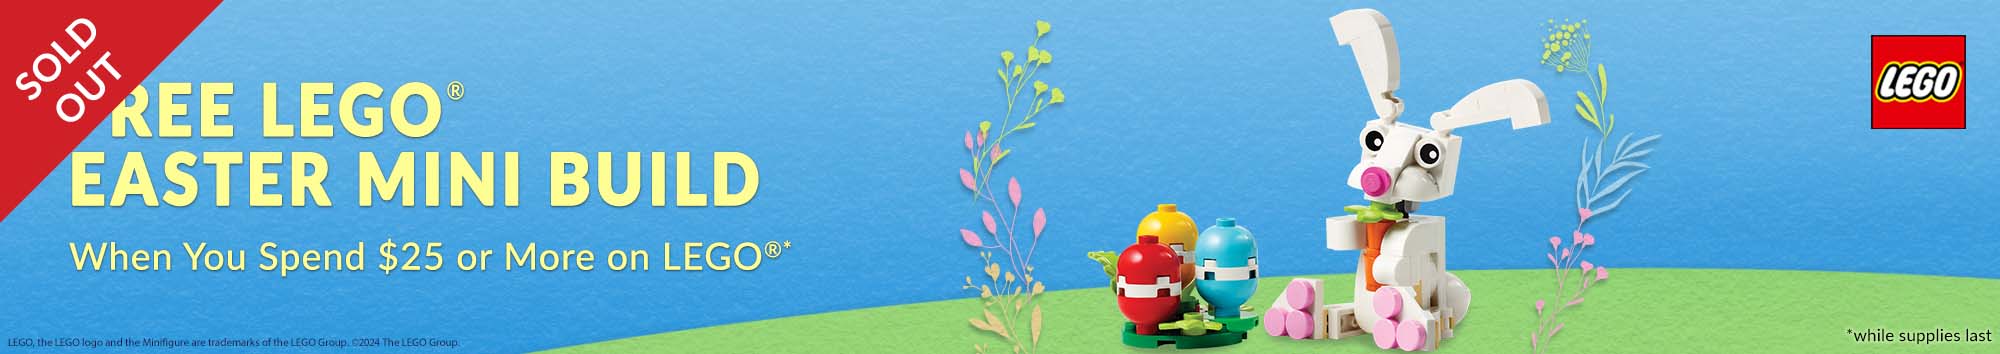 Free Easter Lego Mini Build When You Spend $25 or More on LEGO